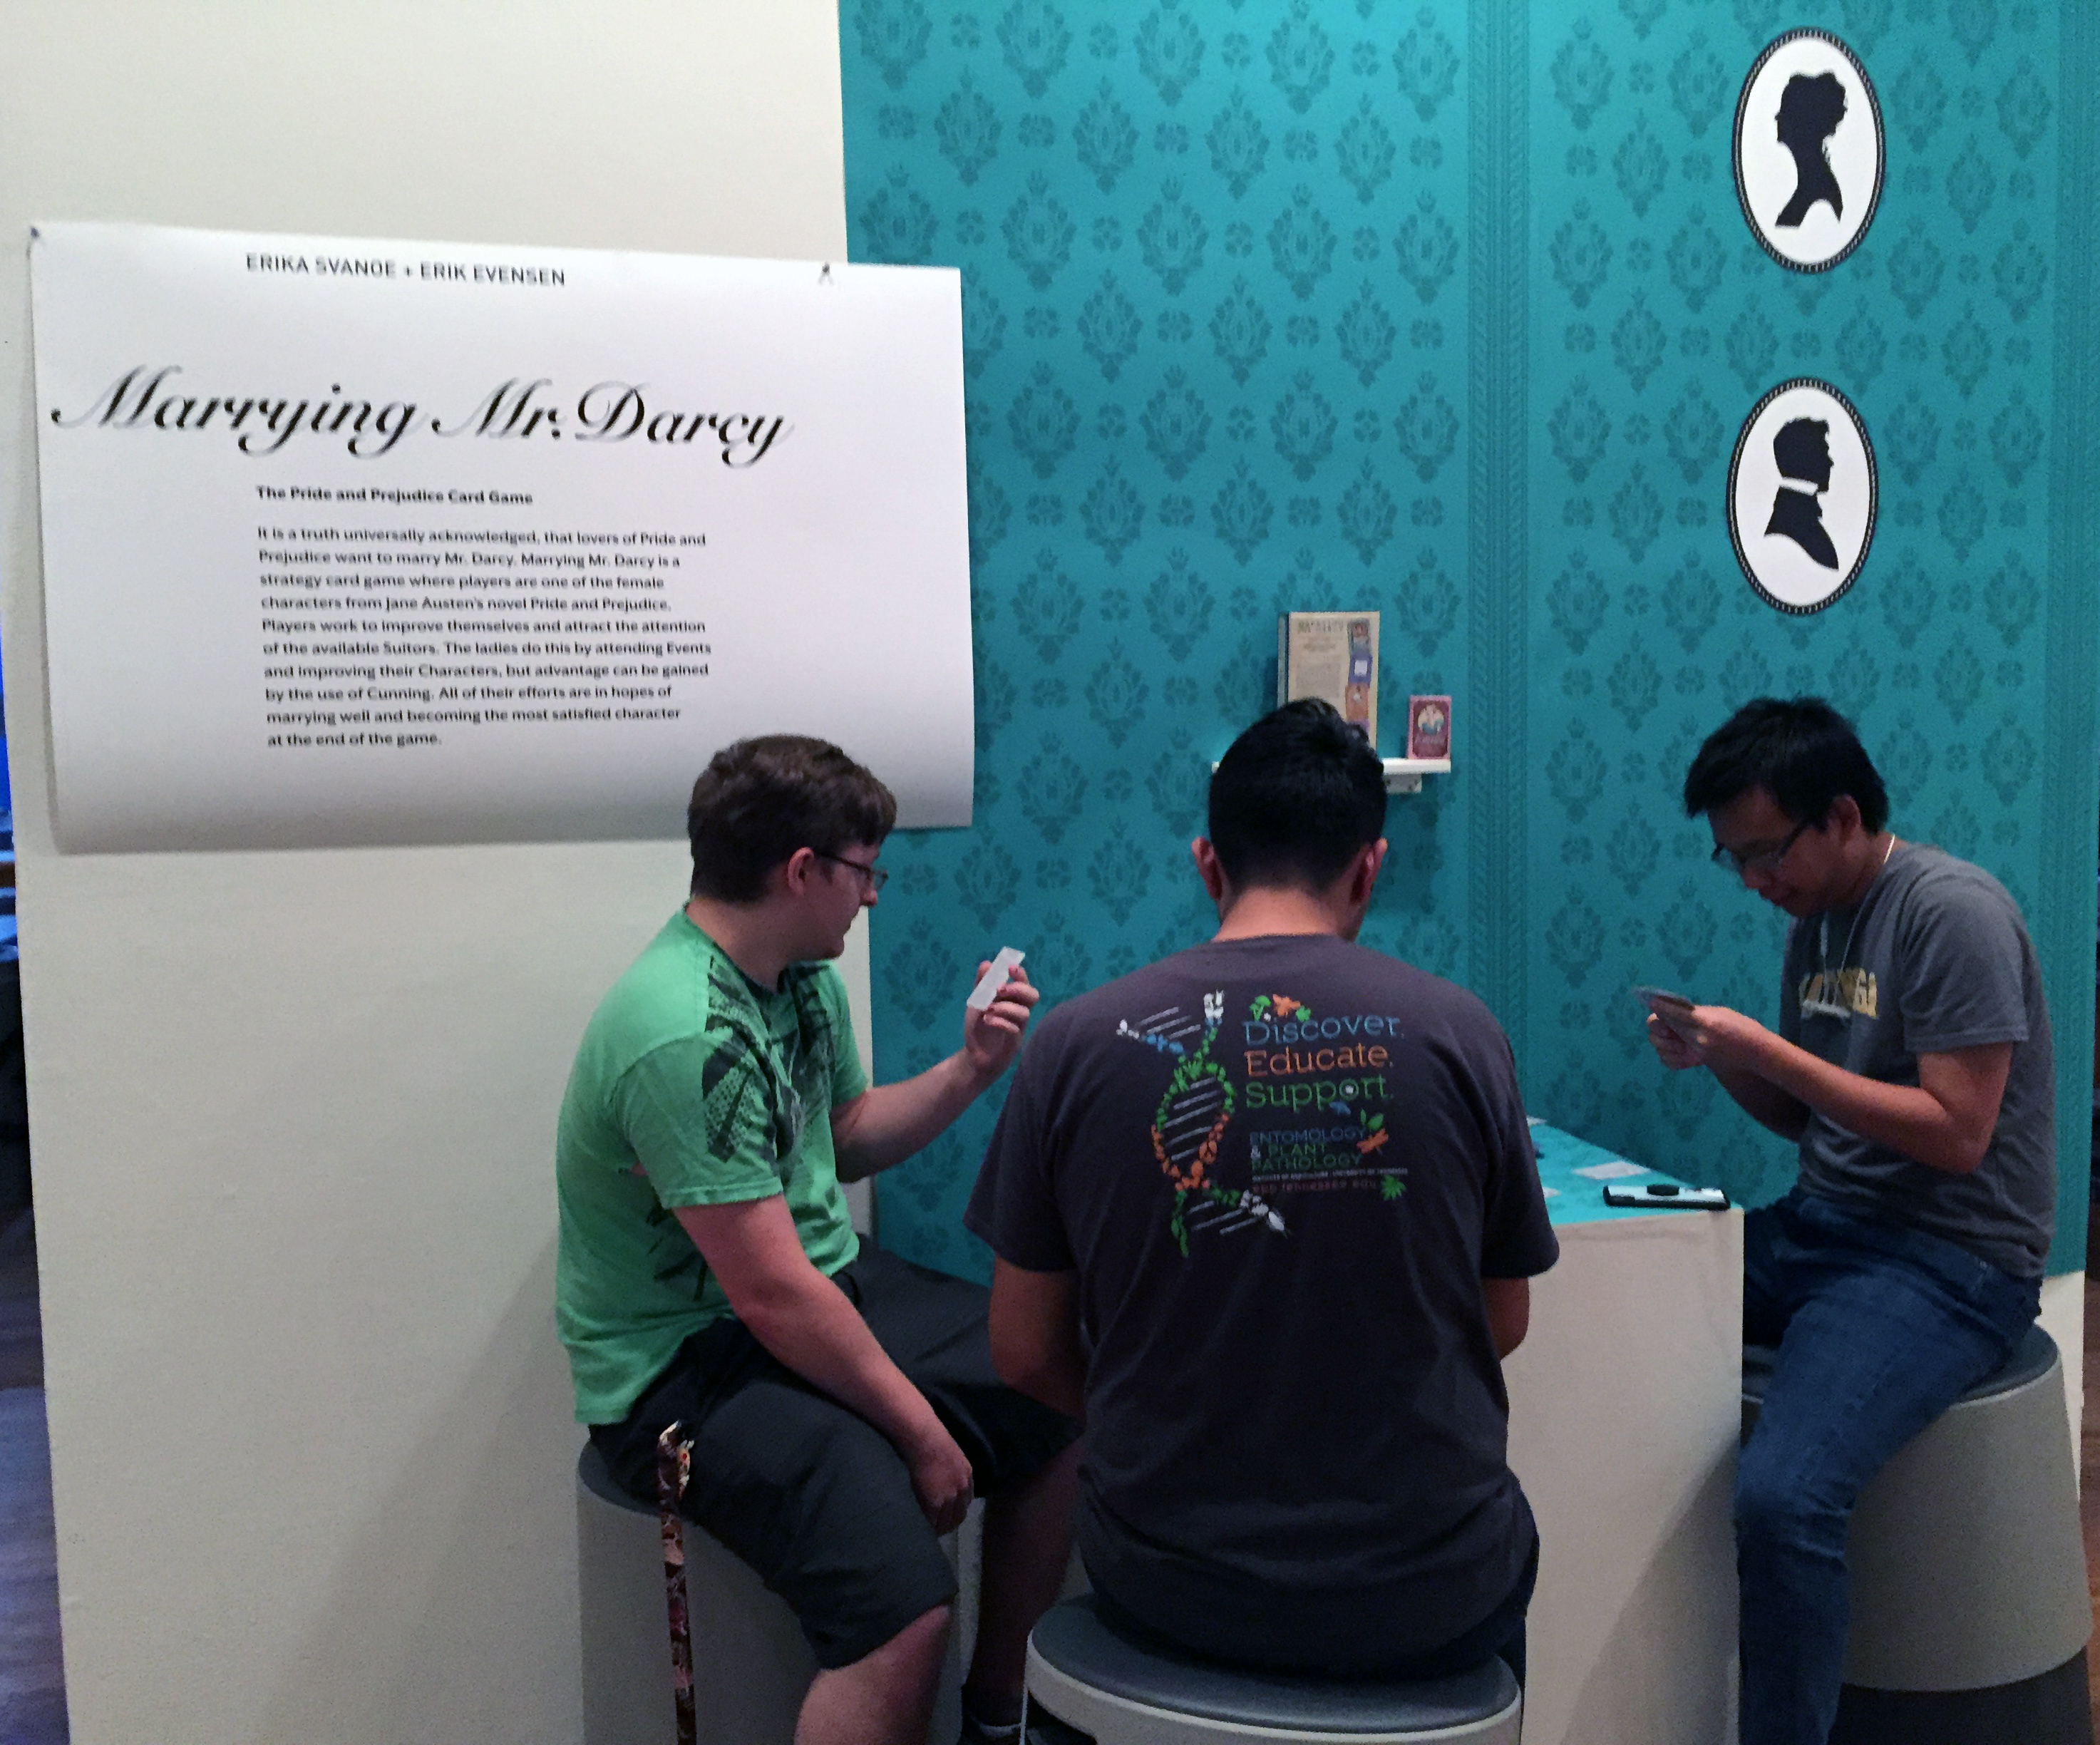 At the exhibt at the University of Tennessee-Knoxville, visitors are able to experience the card game by playing it.